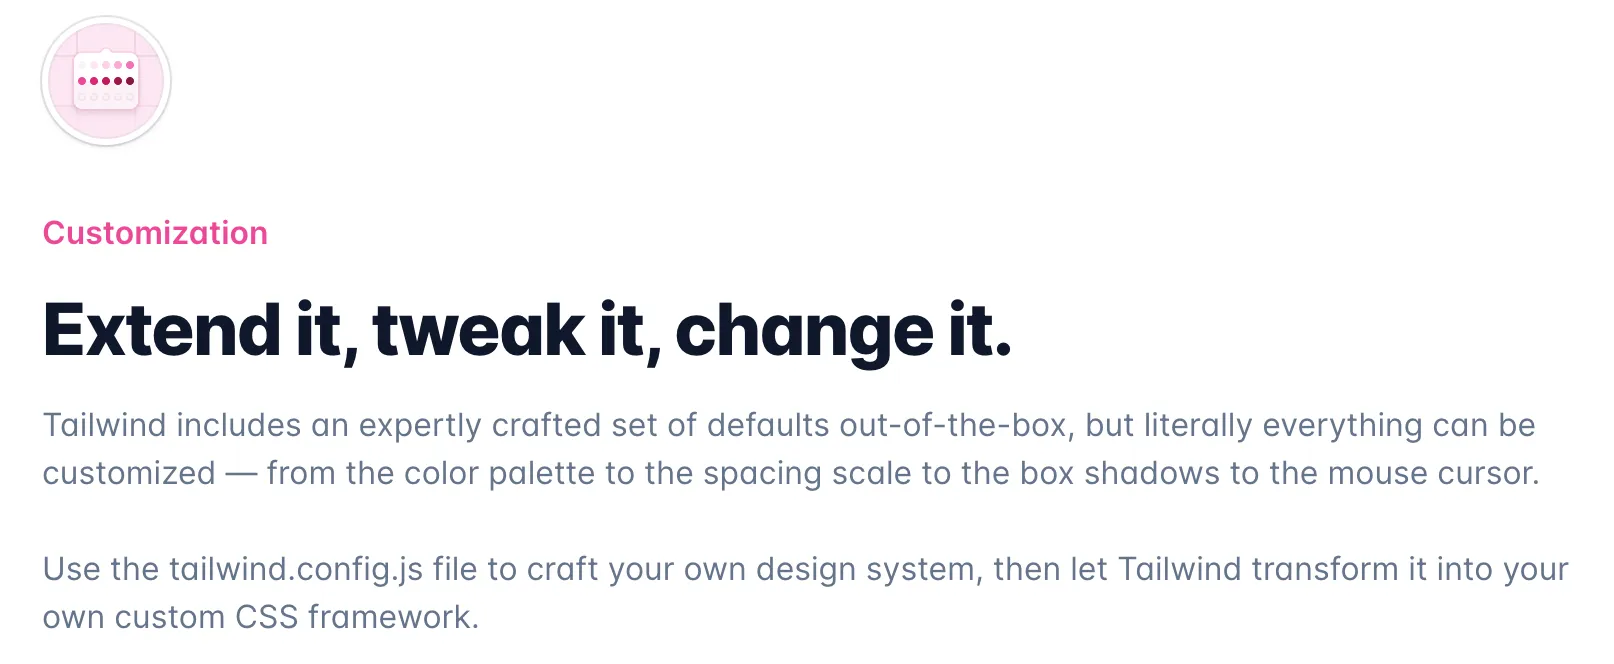 “Use the tailwind.config.js” file to craft your own design system”